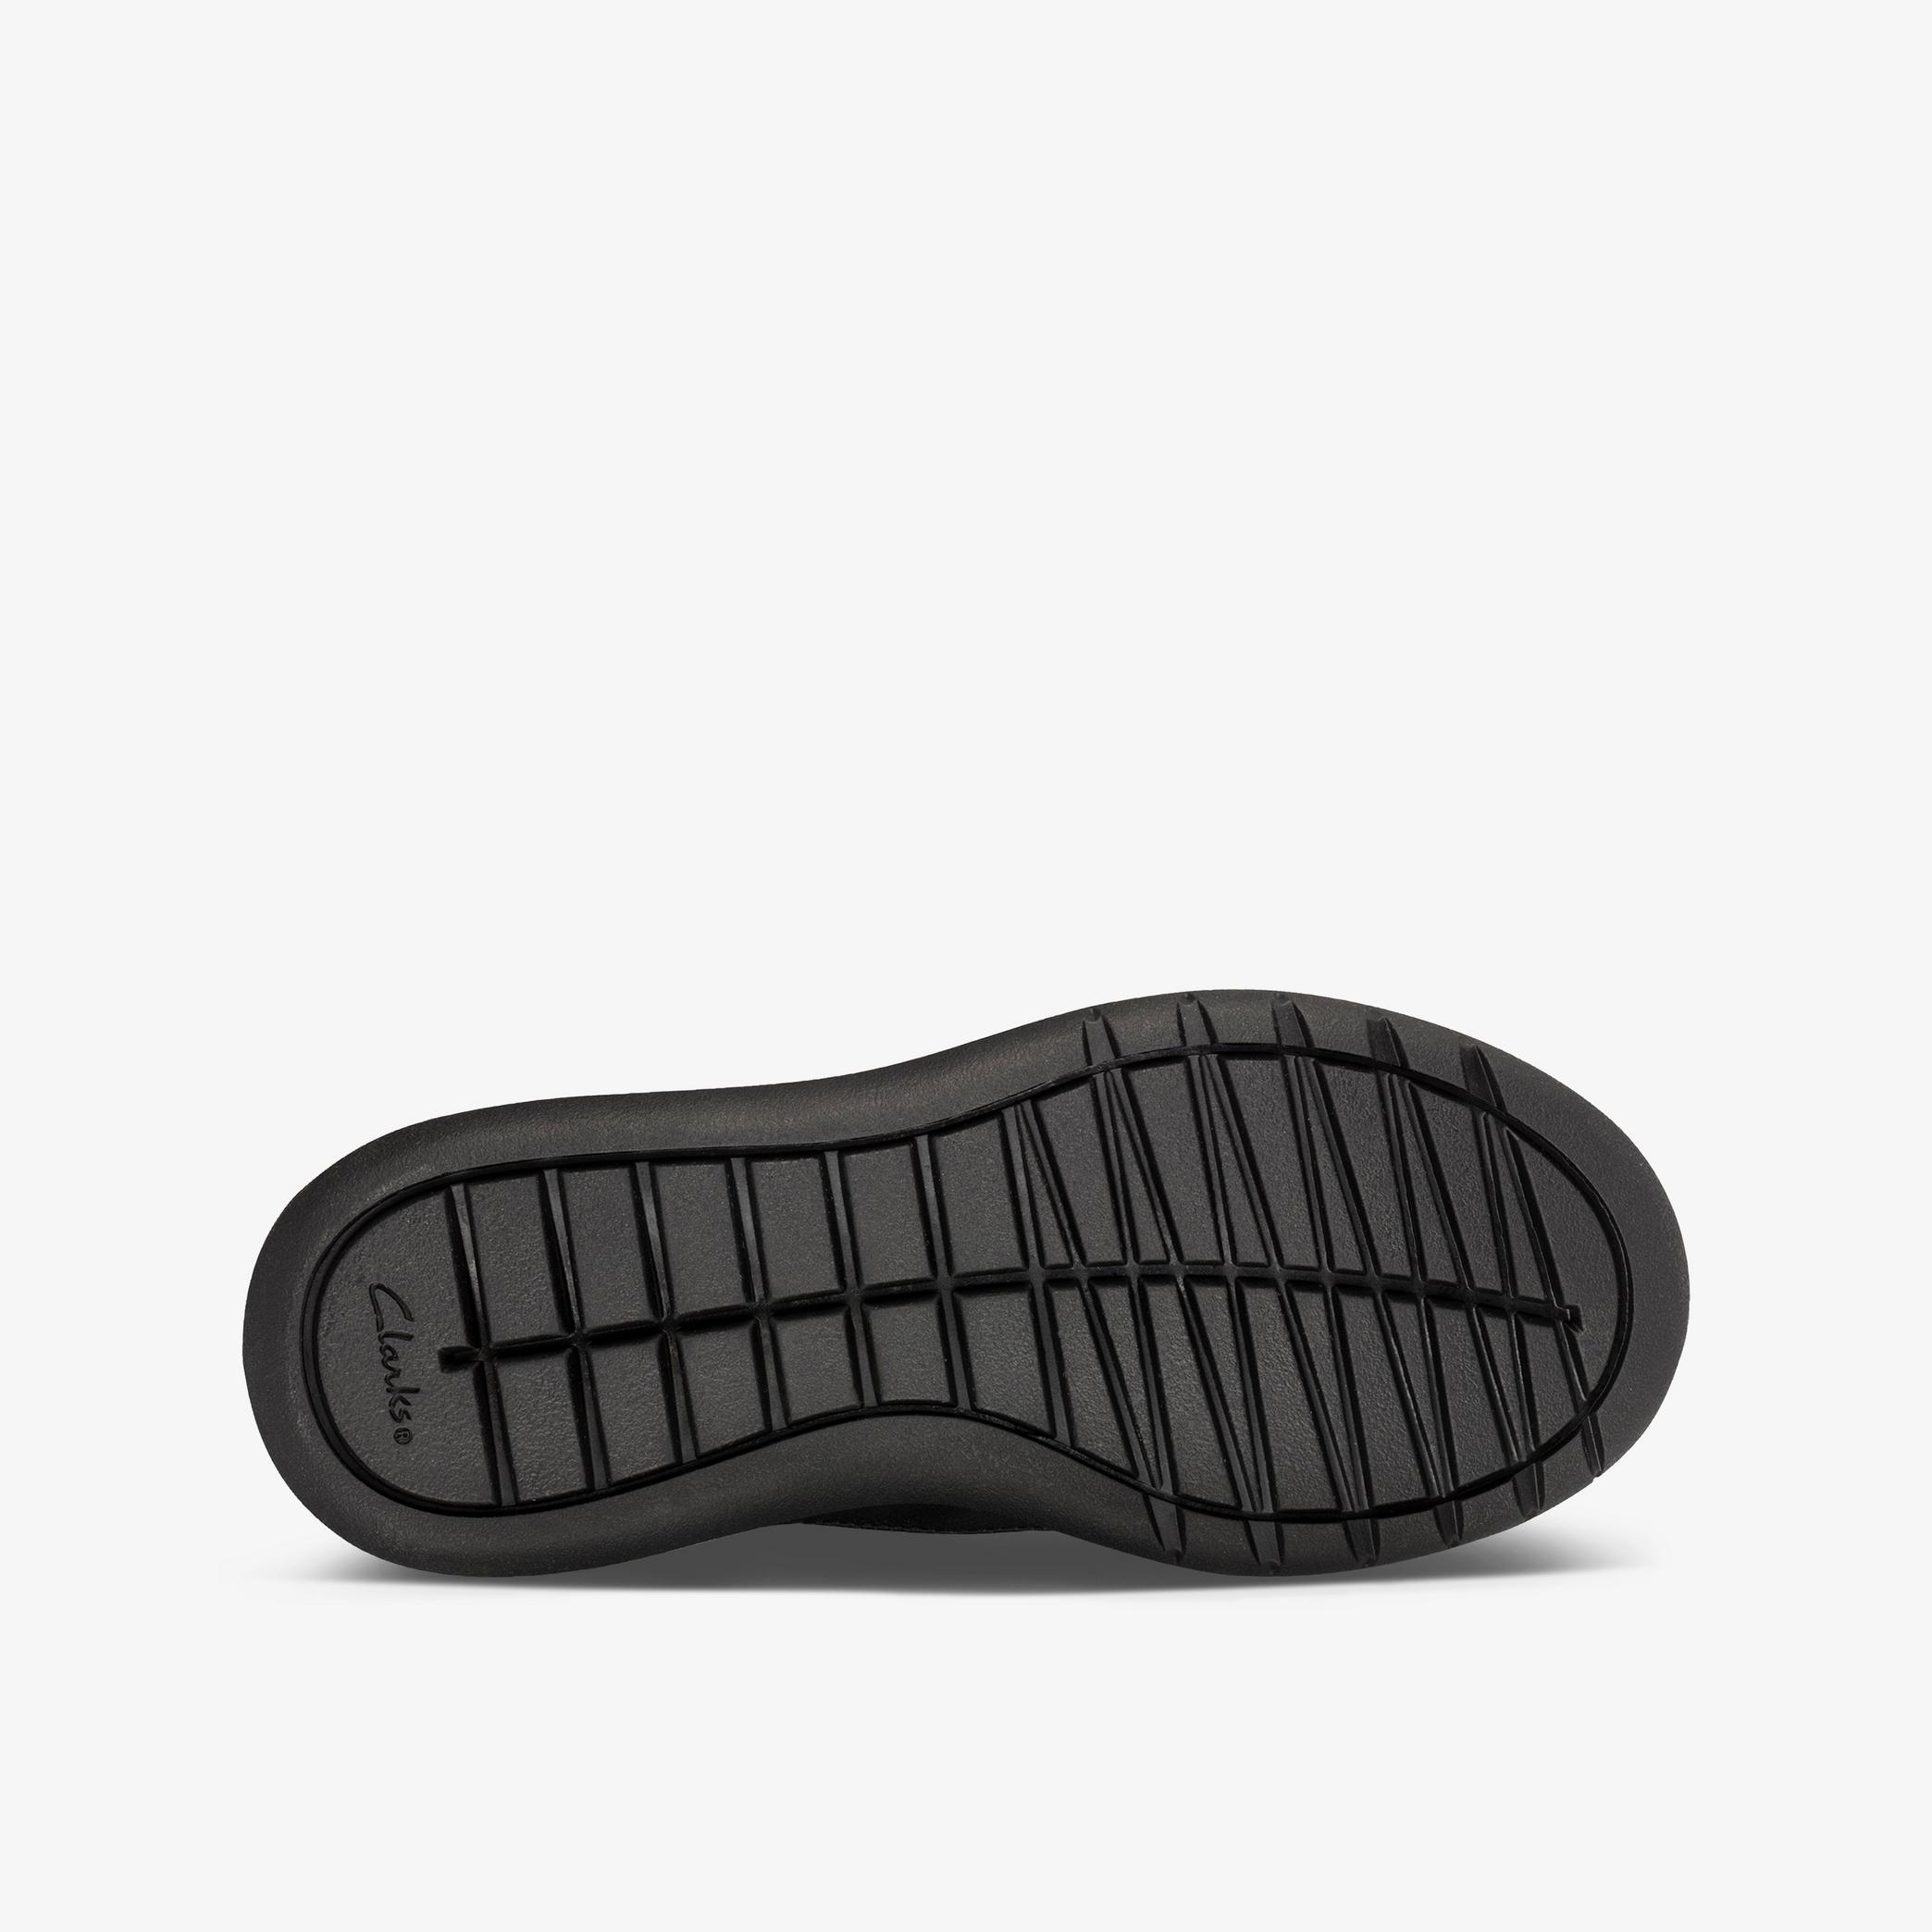 BOYS Scape Track Kid Black Leather Shoes | Clarks Outlet